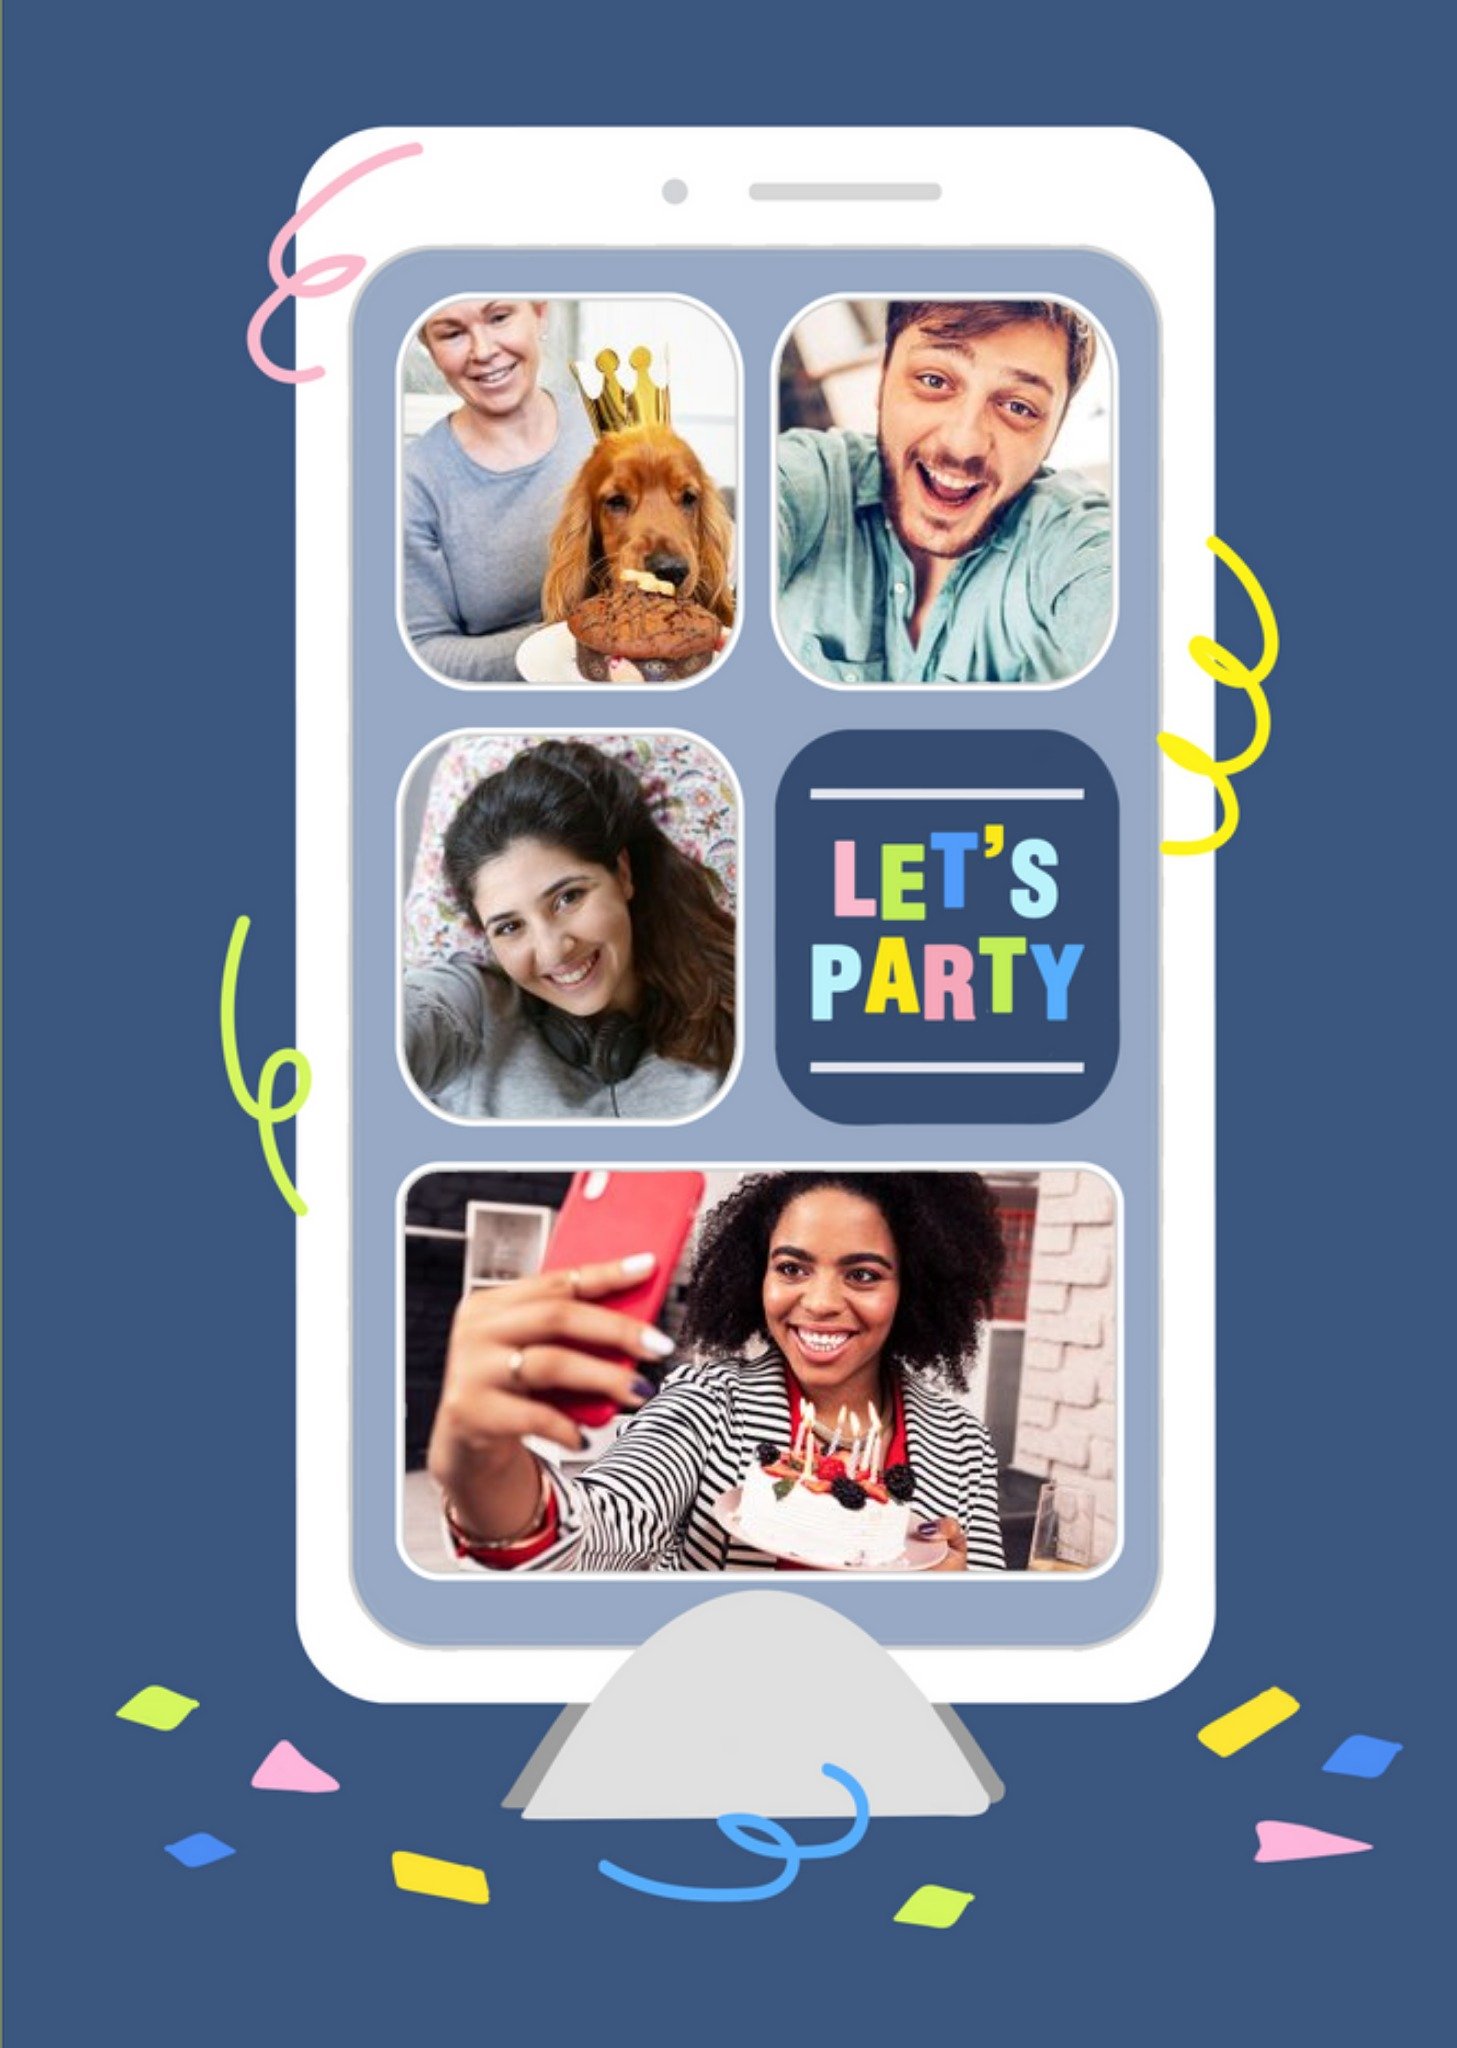 Moonpig Topical Isolation Facetime Let's Party Photo Upload Birthday Card, Large